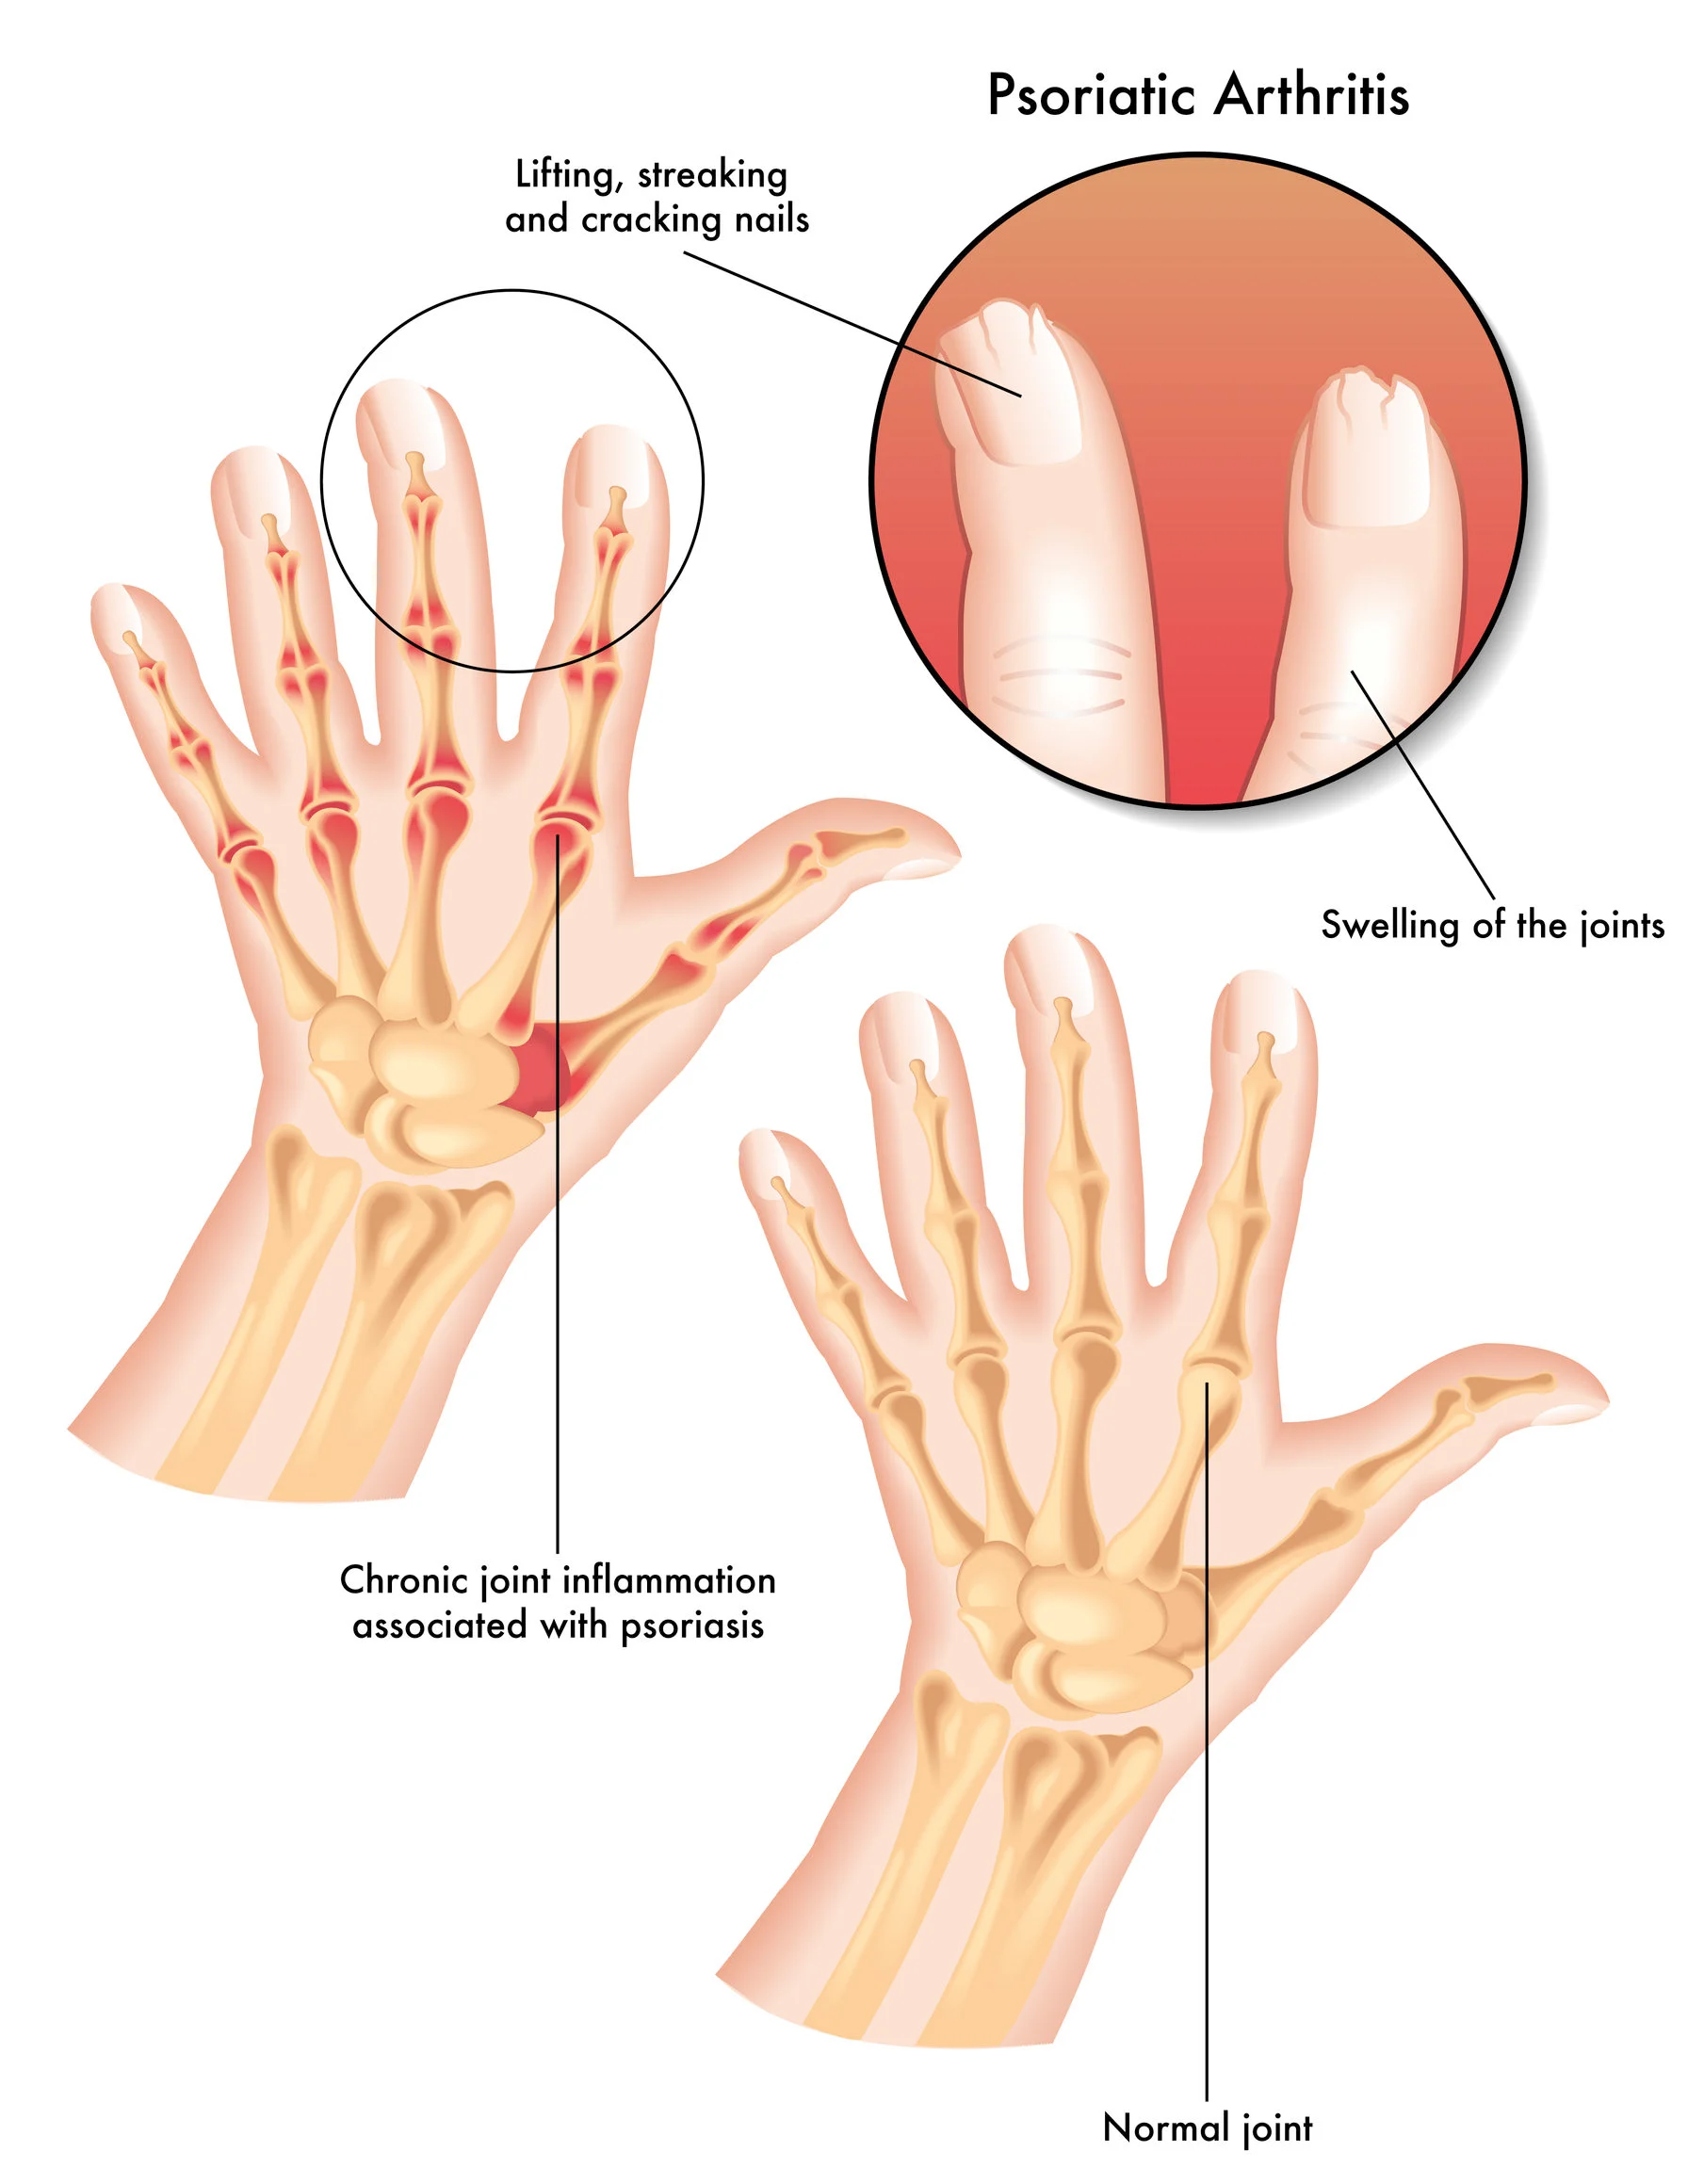 Case Report: Psoriatic Arthritis and Stem Cell Therapy